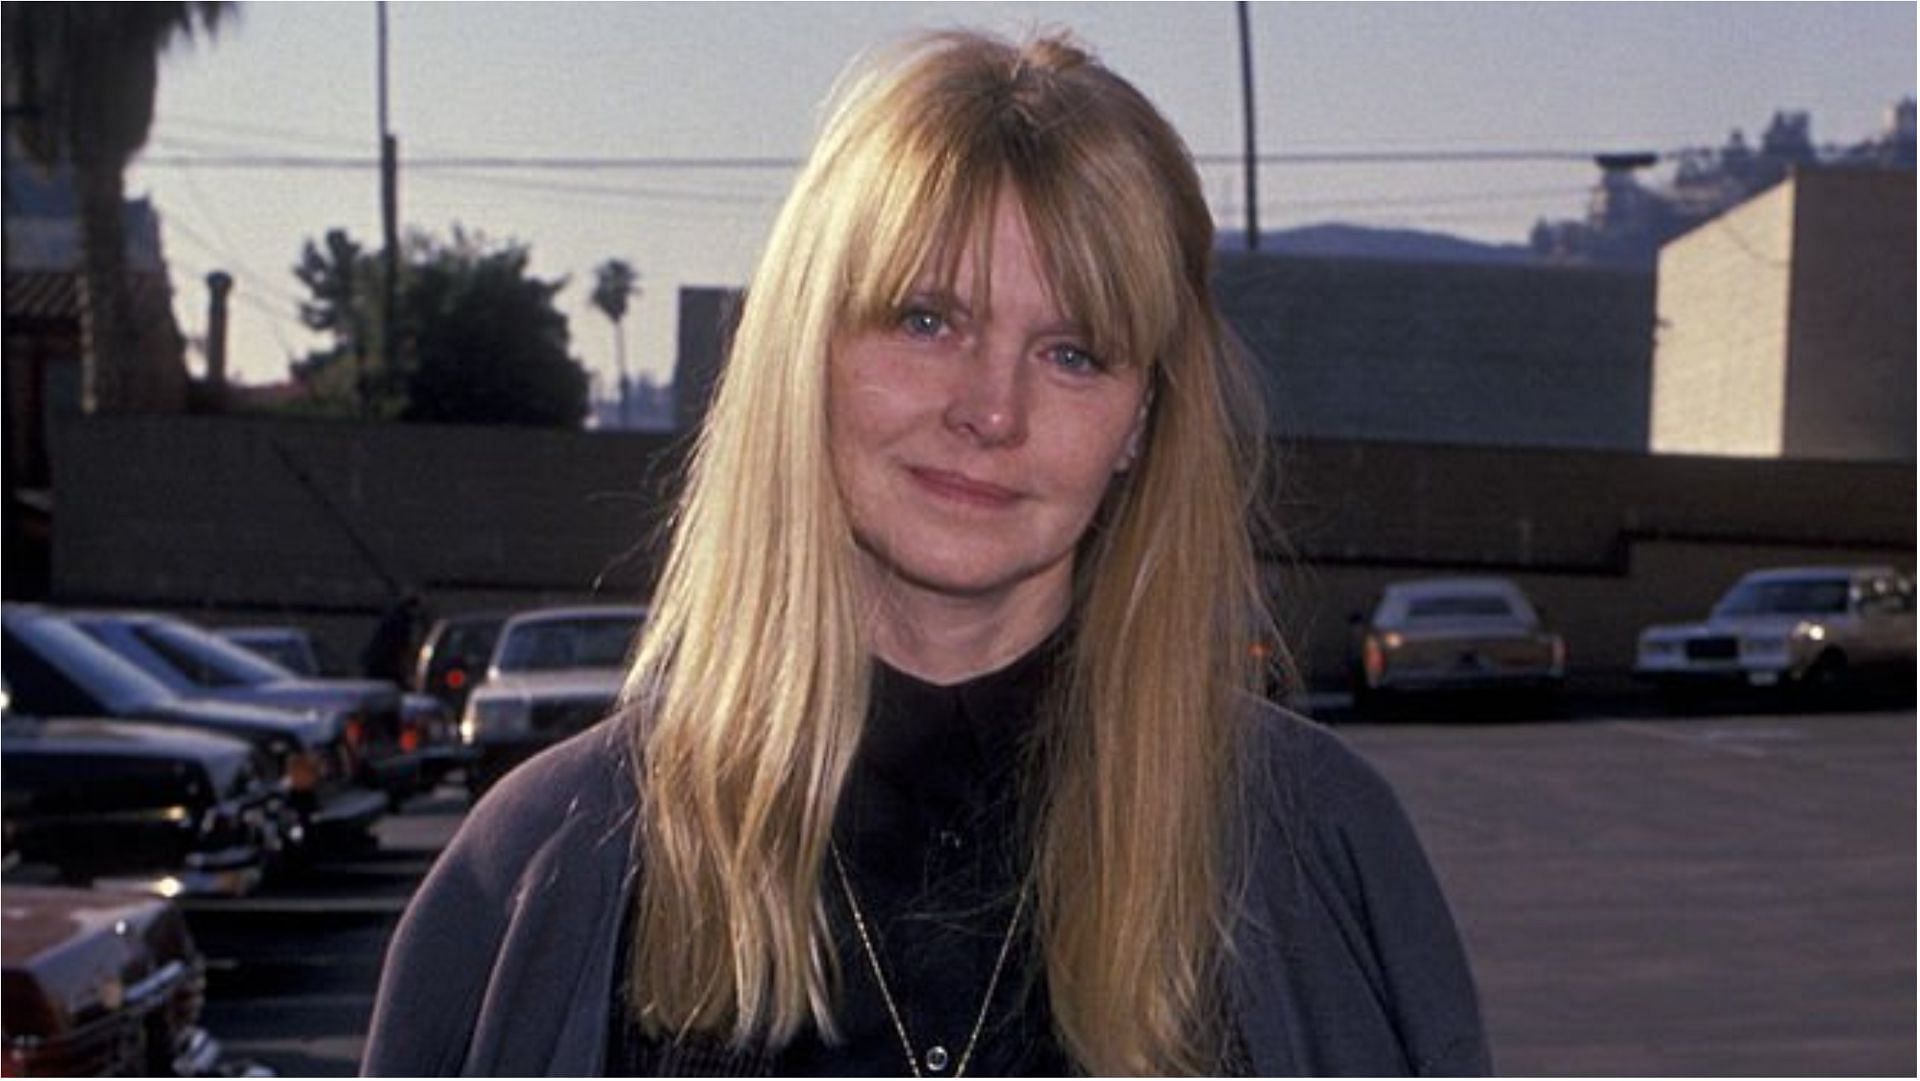 Melinda Dillon appeared in various films and TV shows (Image via Ron Gallela, Ltd./Getty Images)